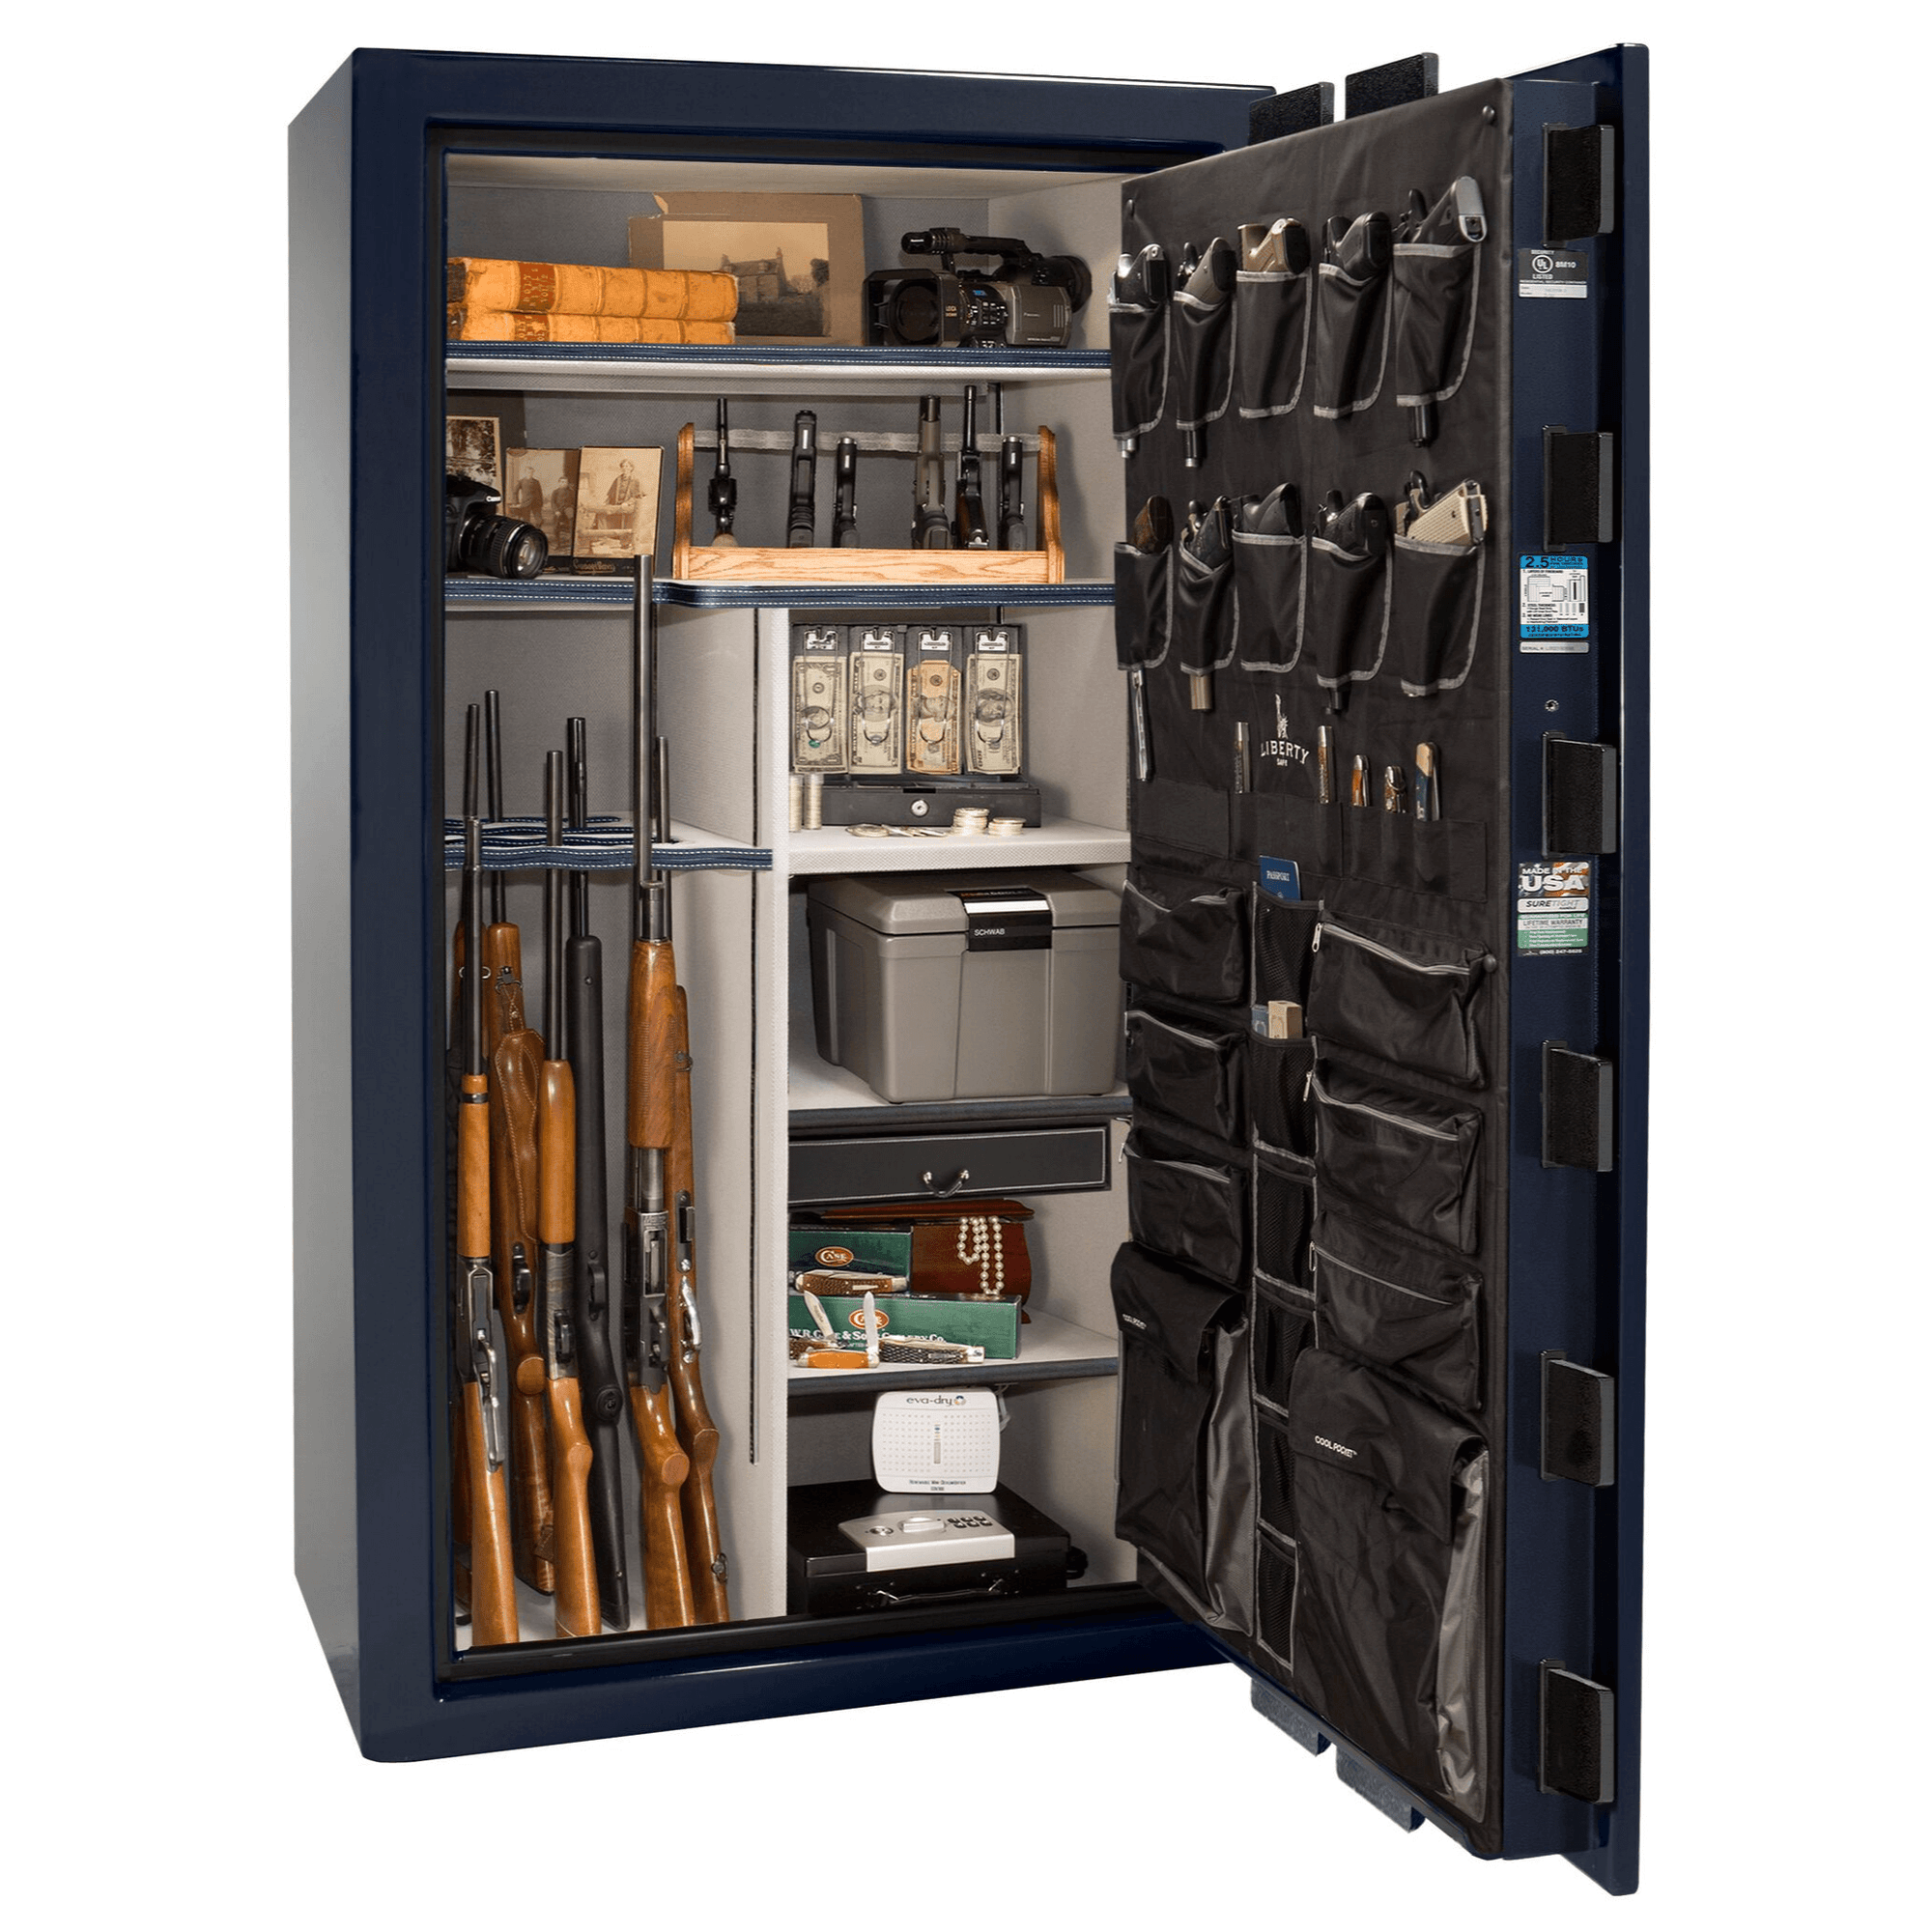 Magnum | 50 | Level 8 Security | 150 Minute Fire Protection | Blue Gloss | Chrome Mechanical Lock | 72.5"(H) x 42"(W) x 32"(D)